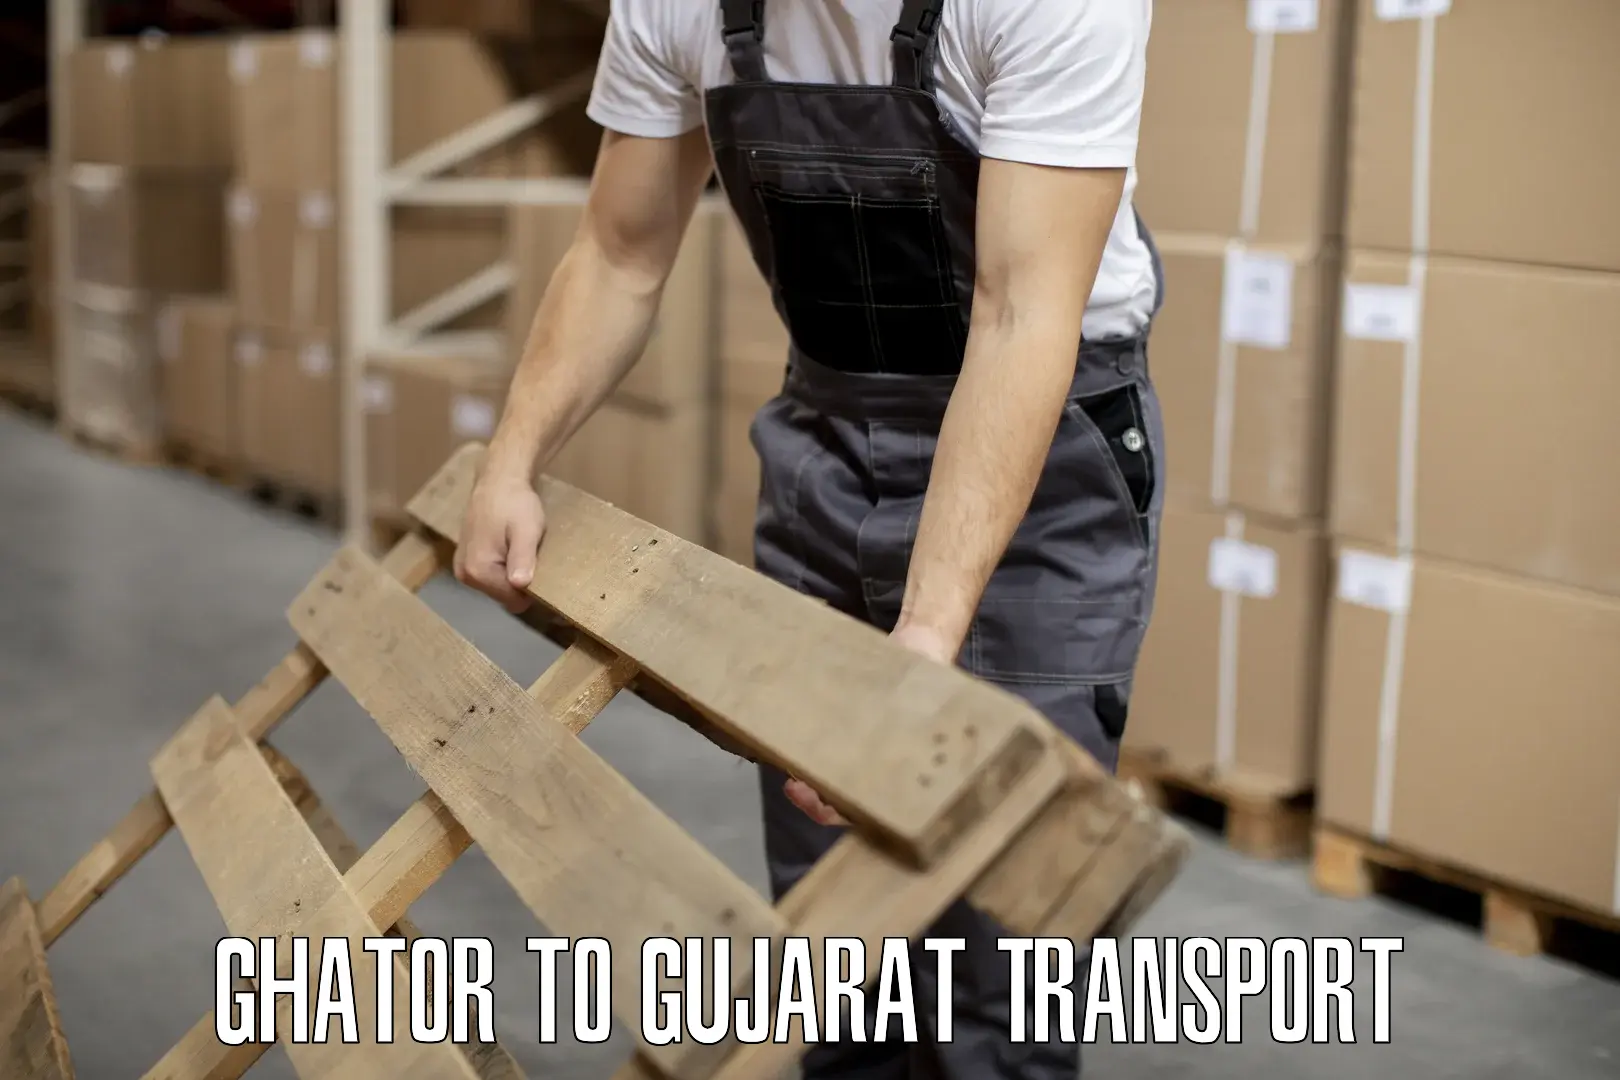 Container transport service Ghator to Bhabhar